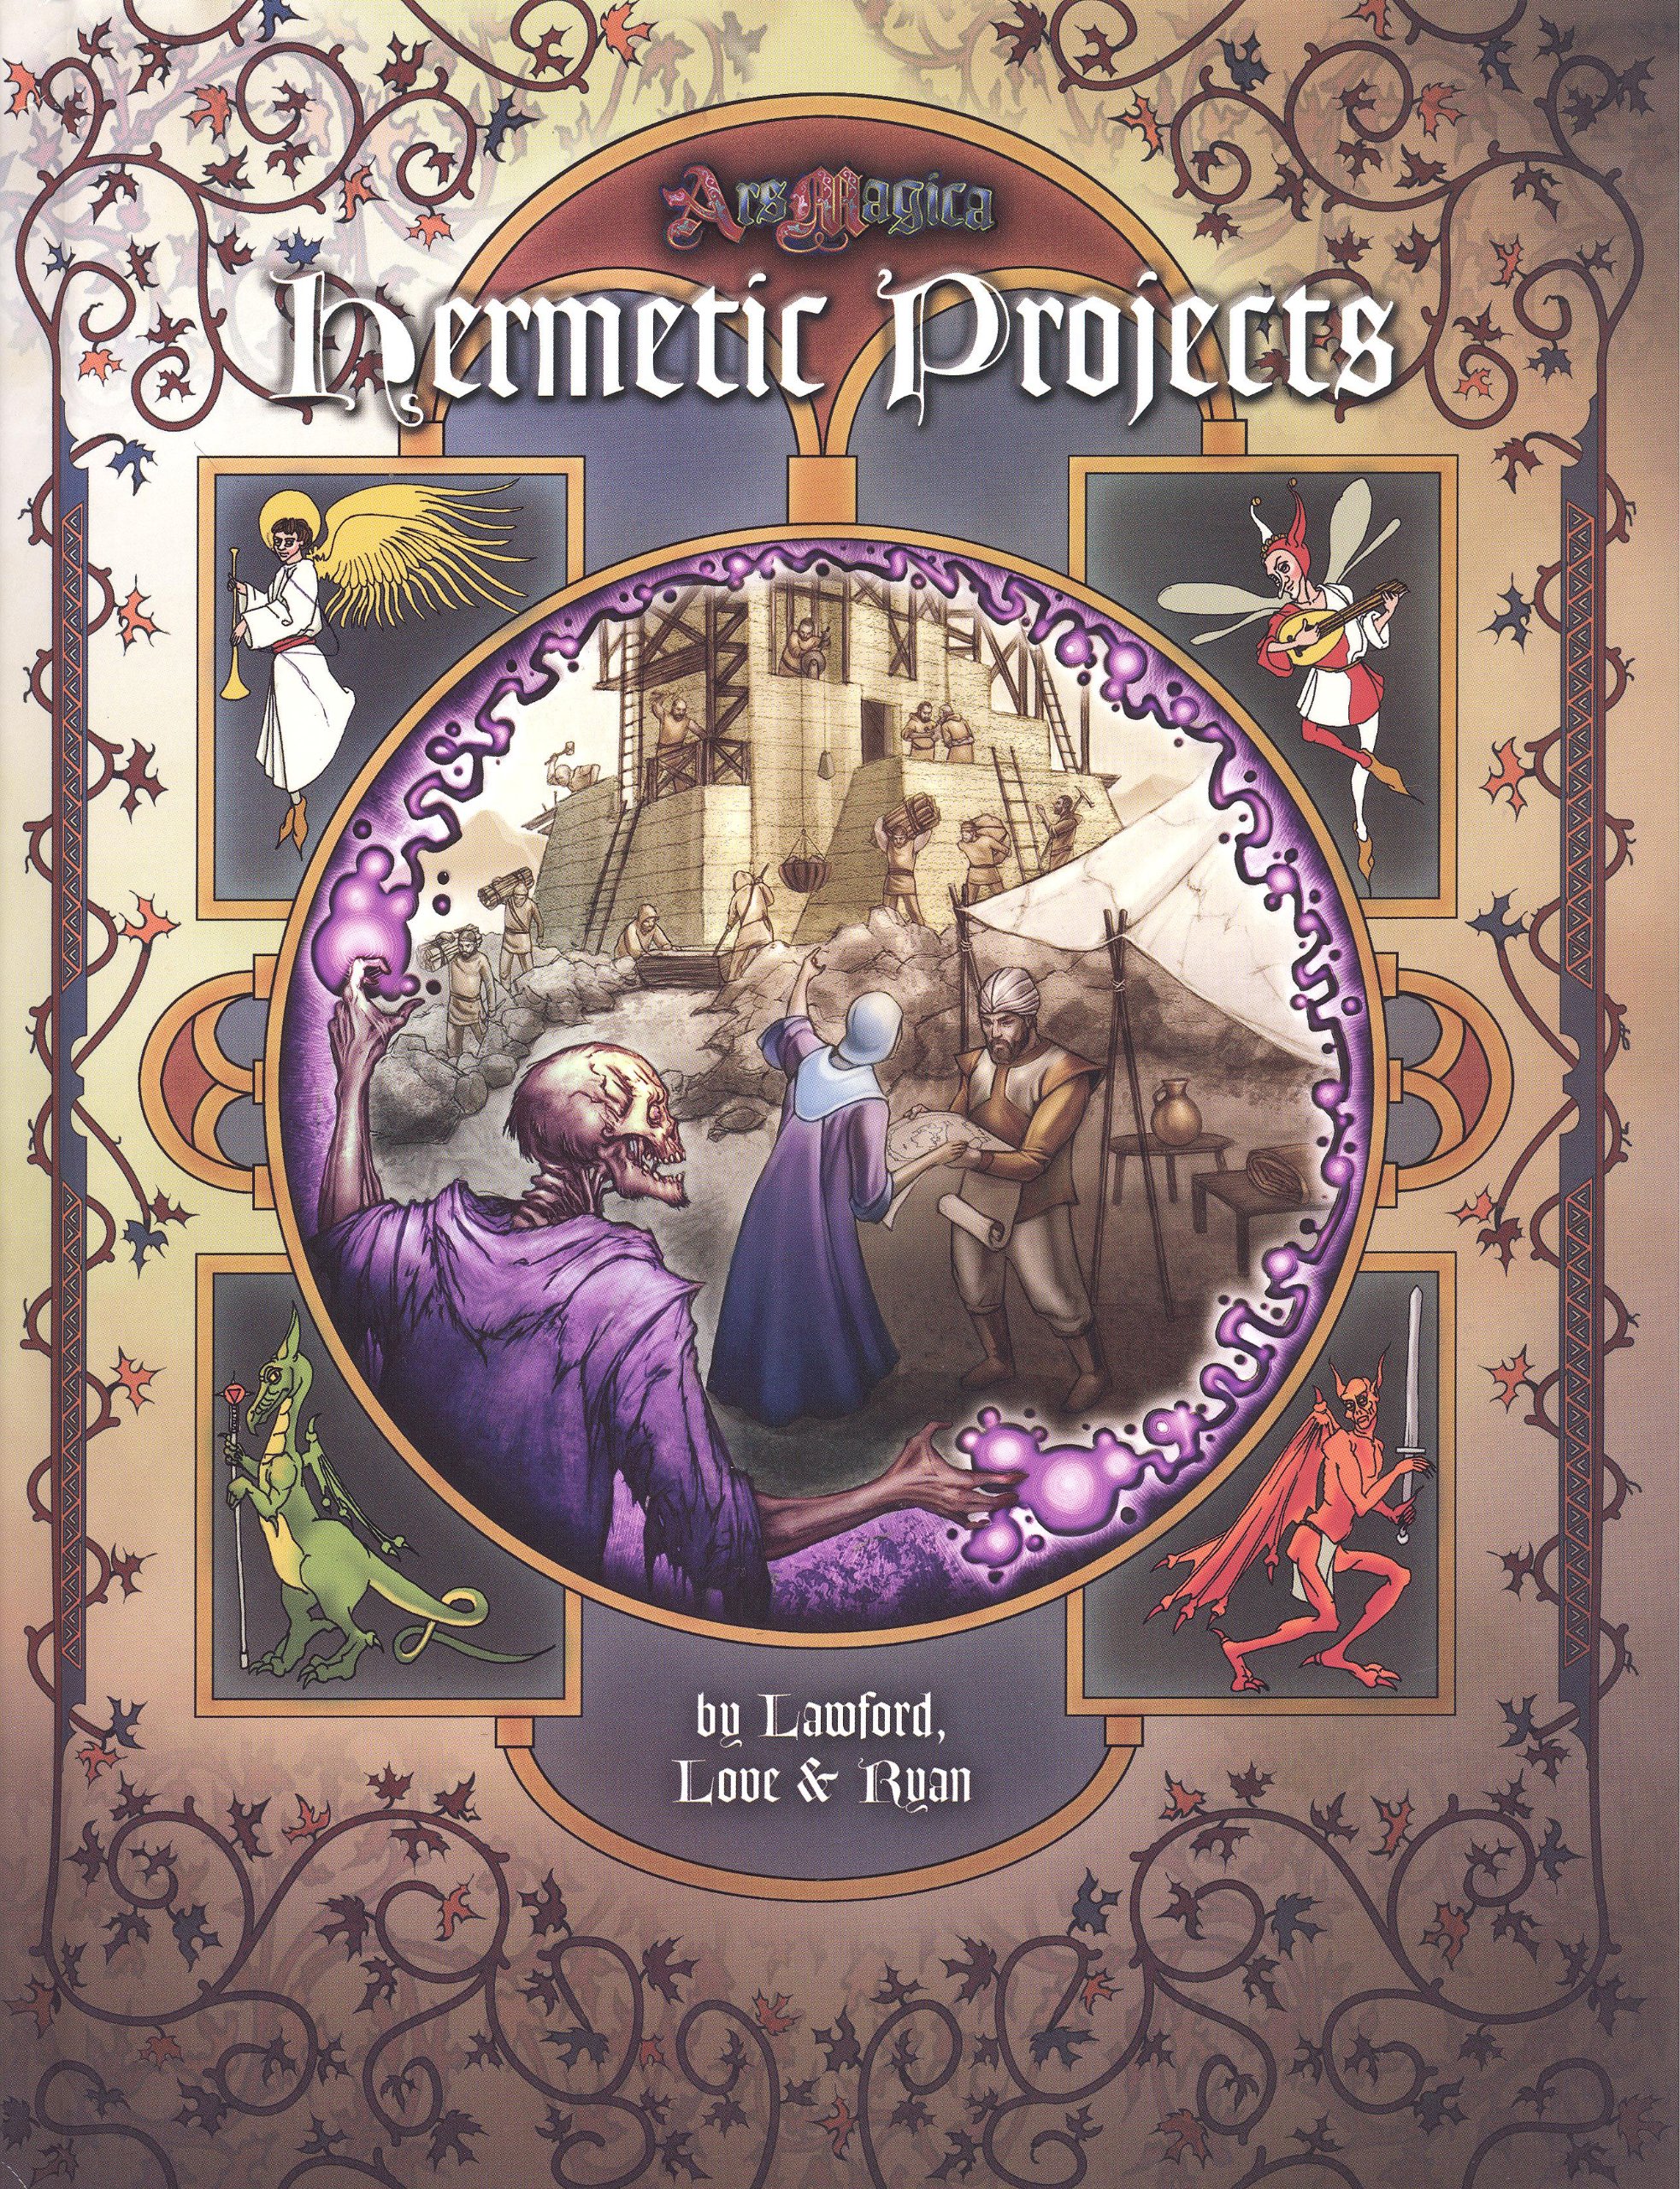 Ars Magica: Hermetic Projects 